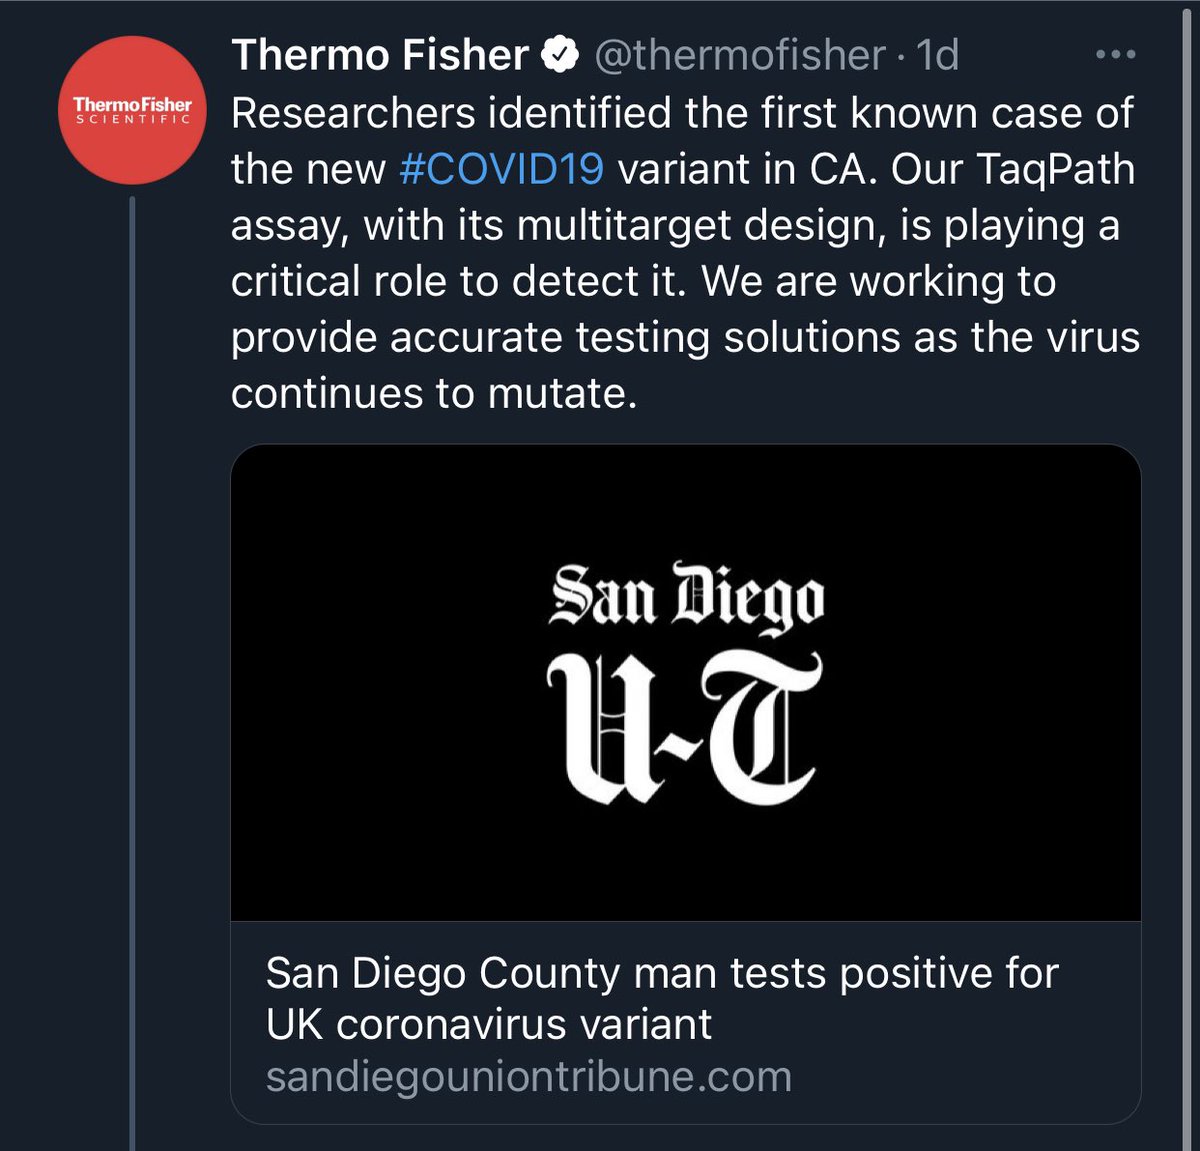 Pandemic profiteer  @thermofisher is trying to monopolize the shortcut fast PCR test for the B117  #SARSCoV2 variant—& arrogantly chest thumping. The truth? They found it by dumb luck & now hoarding & refusing to help scientists.Let’s use hashtag:  #thermofisherpandemicprofiteer  https://twitter.com/drericding/status/1344887673190817792